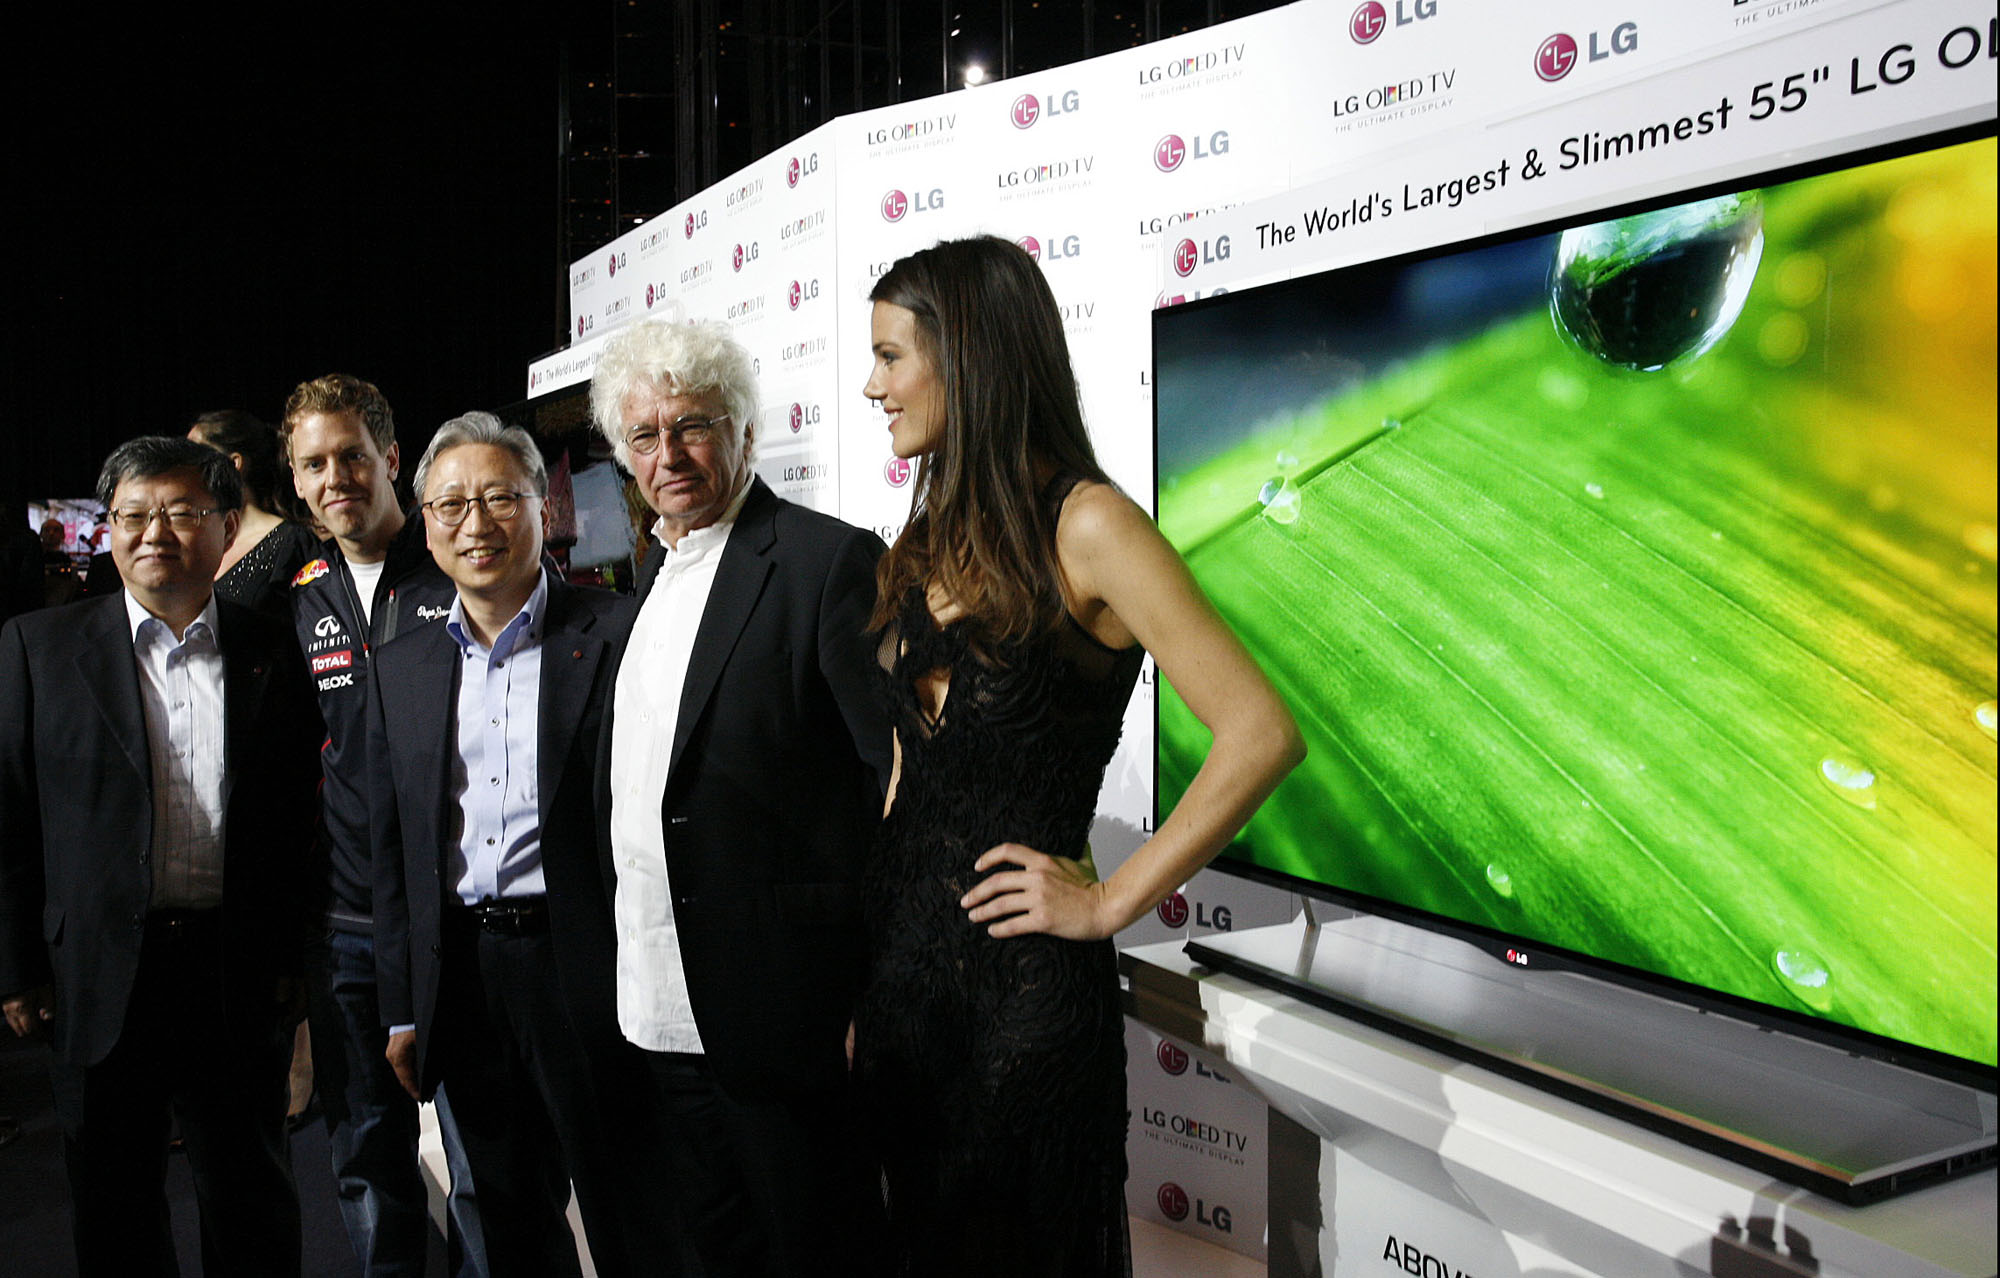 From left to right: LG’s vice president of Overseas TV Sales and Marketing Ki-il Kwon, F1 Champion Sebastian Vettel, LG Europe Head Stanley Cho, film director Jean-Jacques Annaud and model Gemma Sanderson pose in front of LG’s 55-inch OLED TV in Monaco.